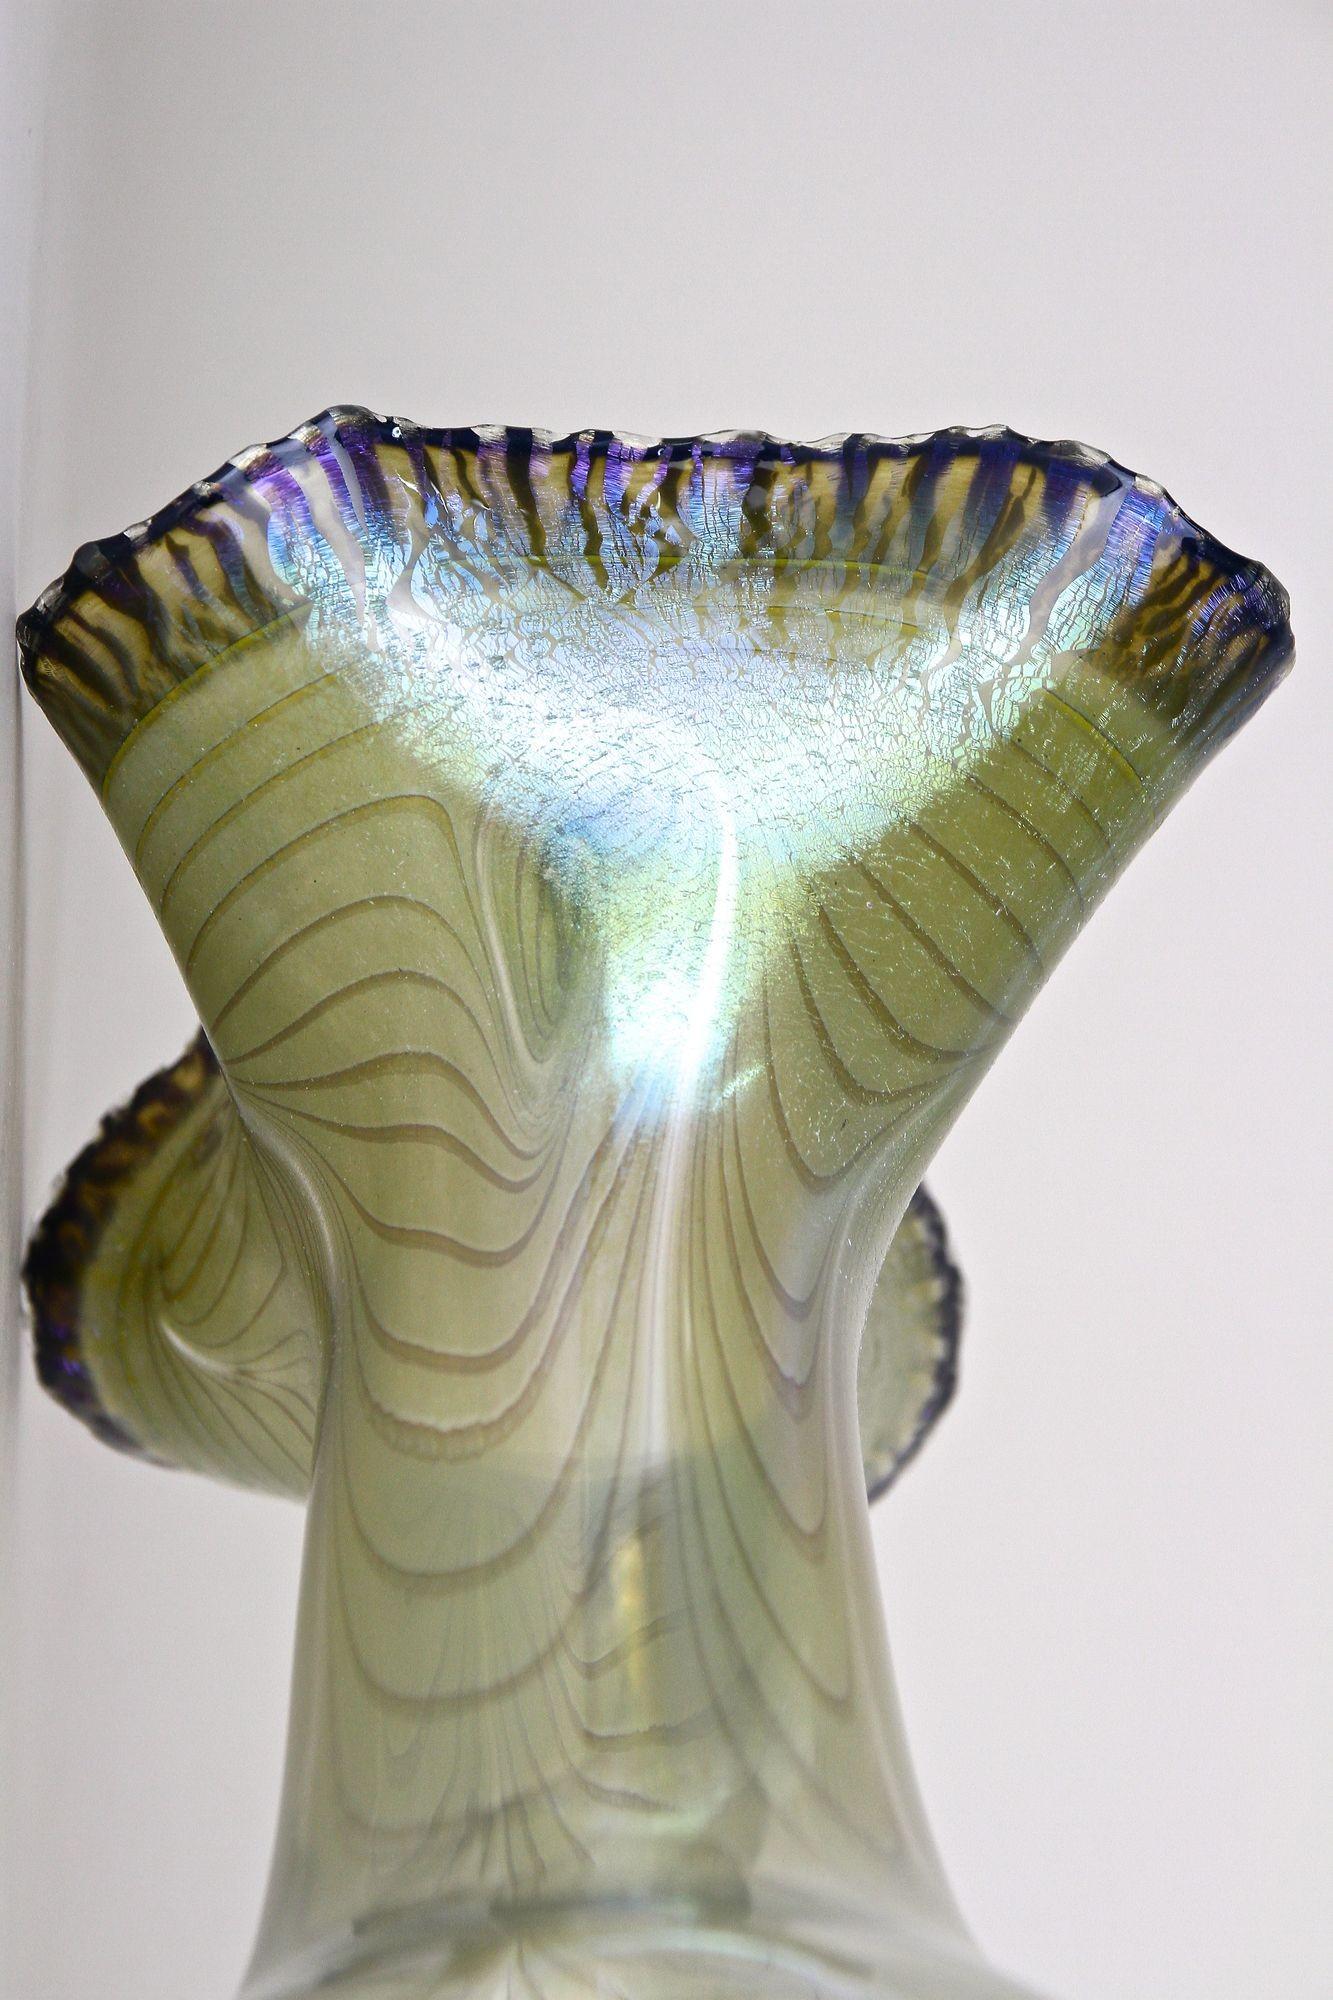 20th Century Iridescent Glass Vase by E. Eisch - Signed, Germany 1982 For Sale 11